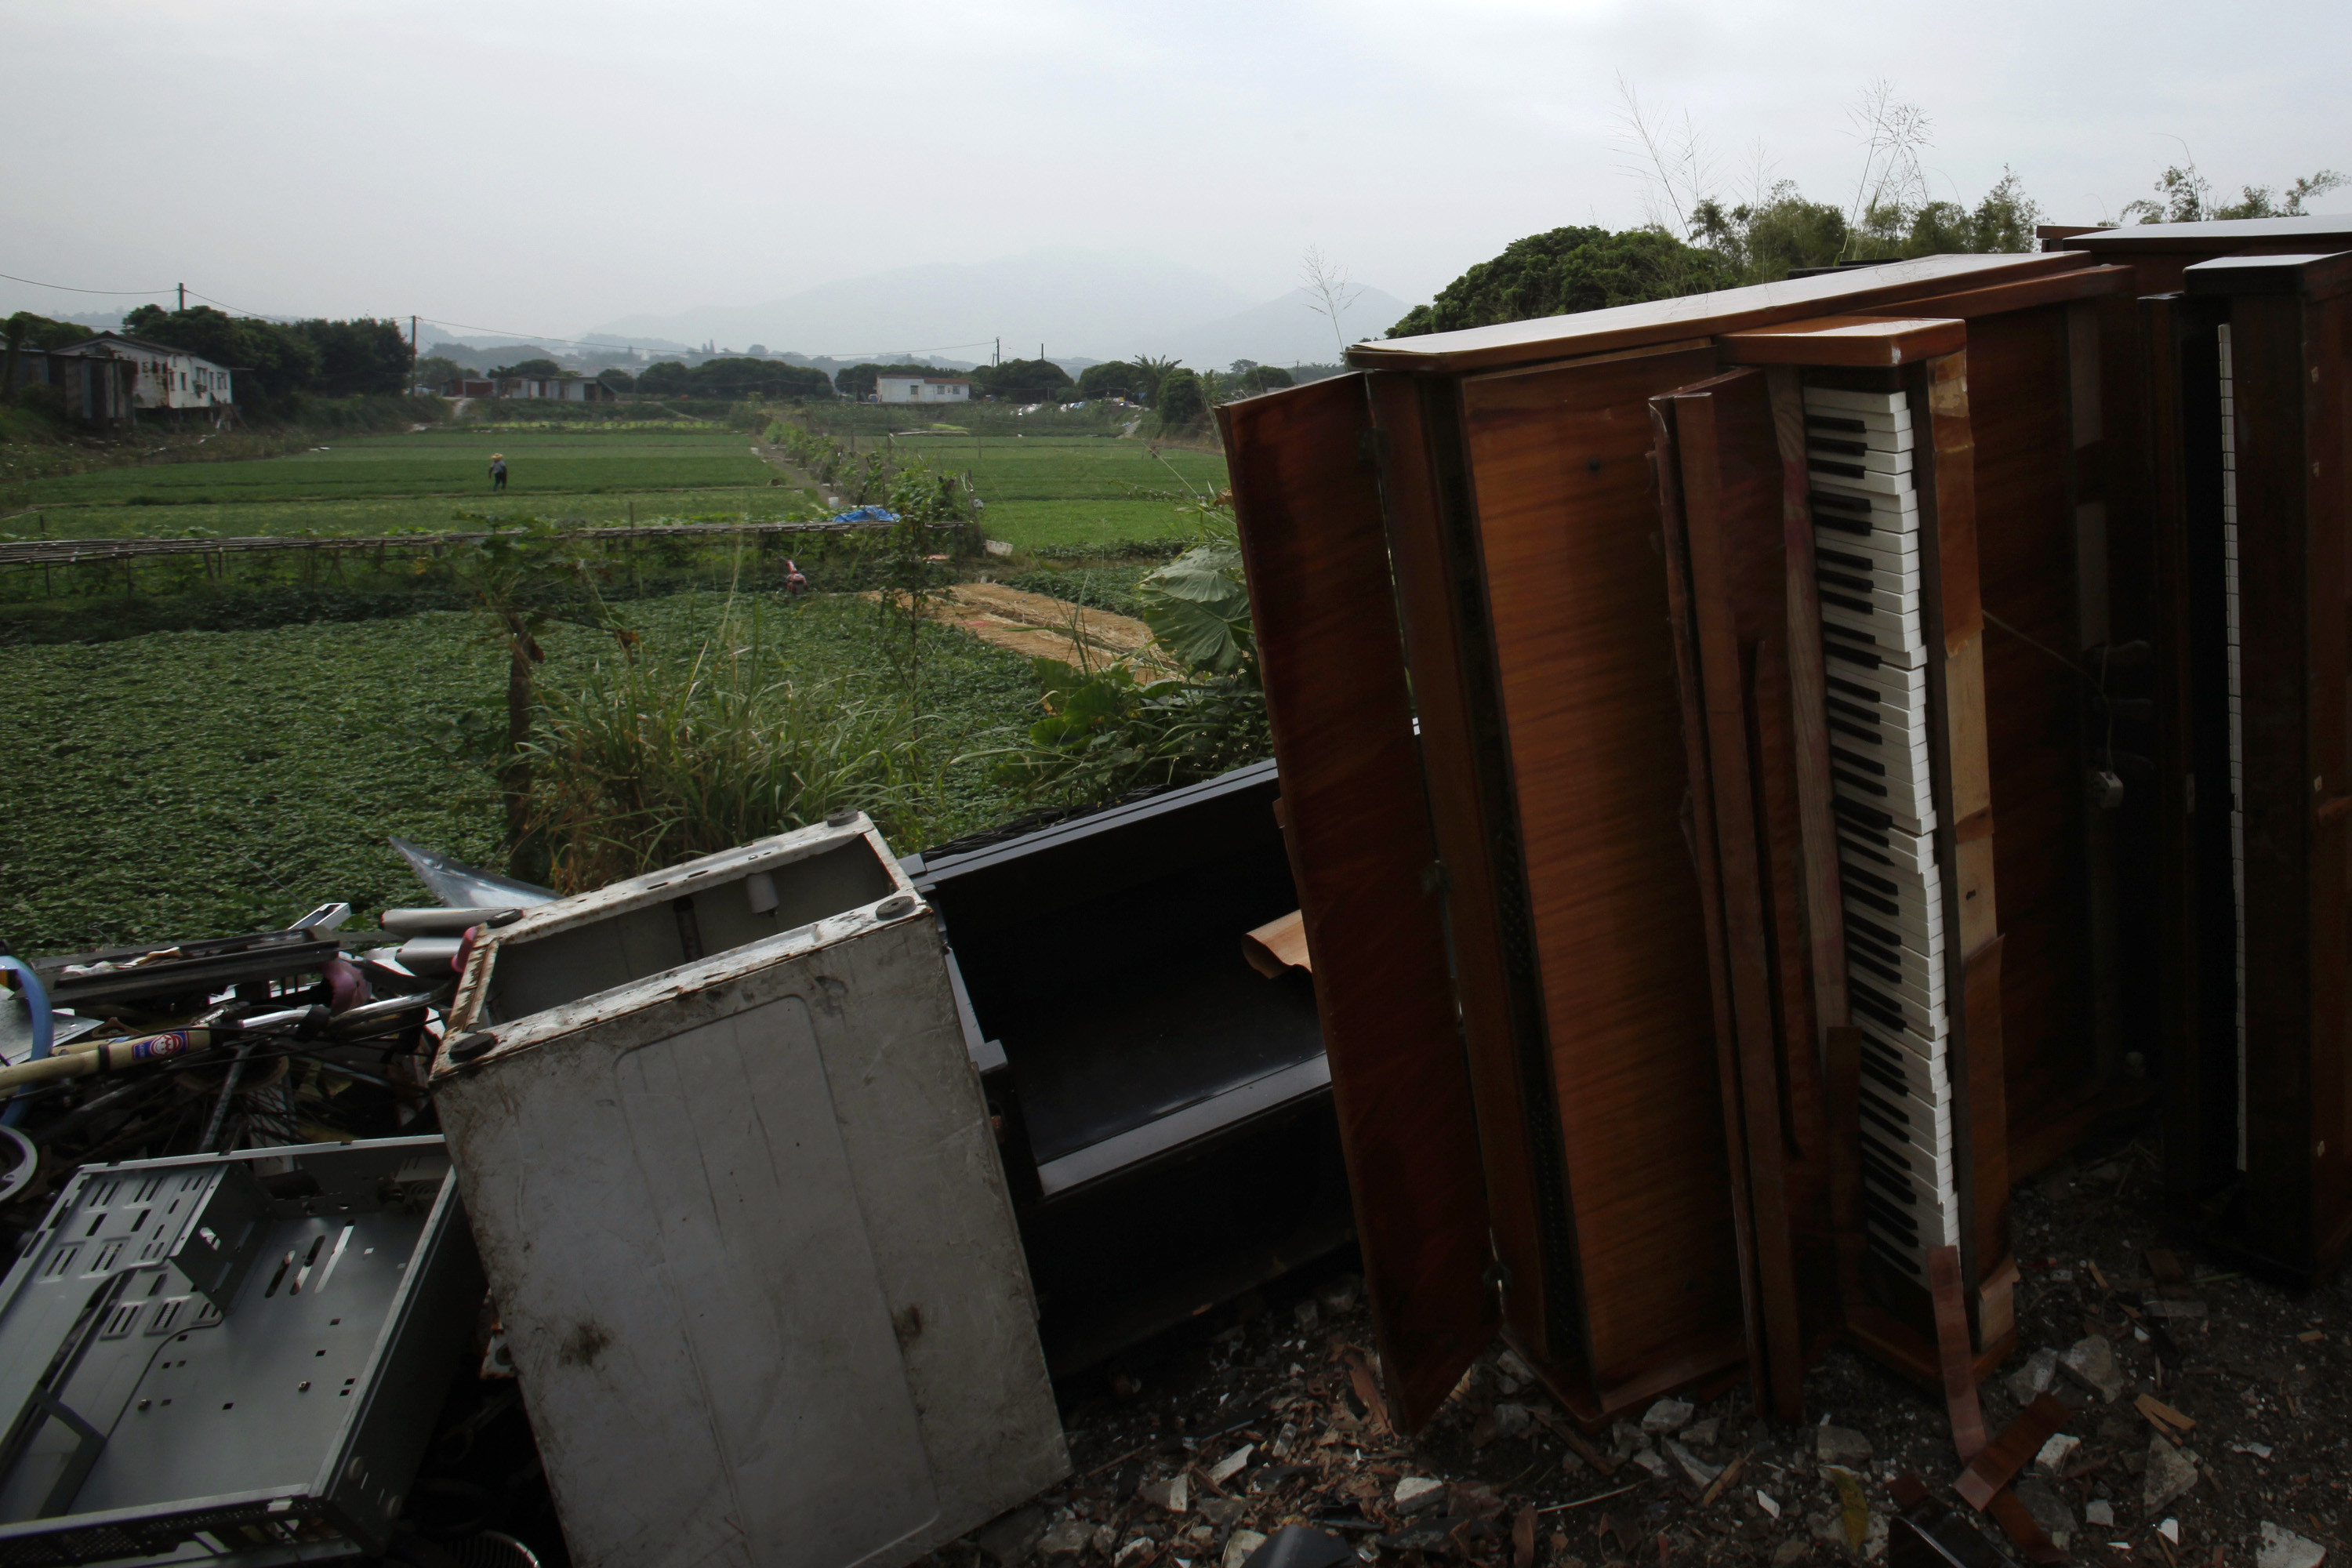 Unwanted items are dumped near farms in Hong Kong's New Territories on Nov. 6, 2013 (Bobby Yip—Reuters)